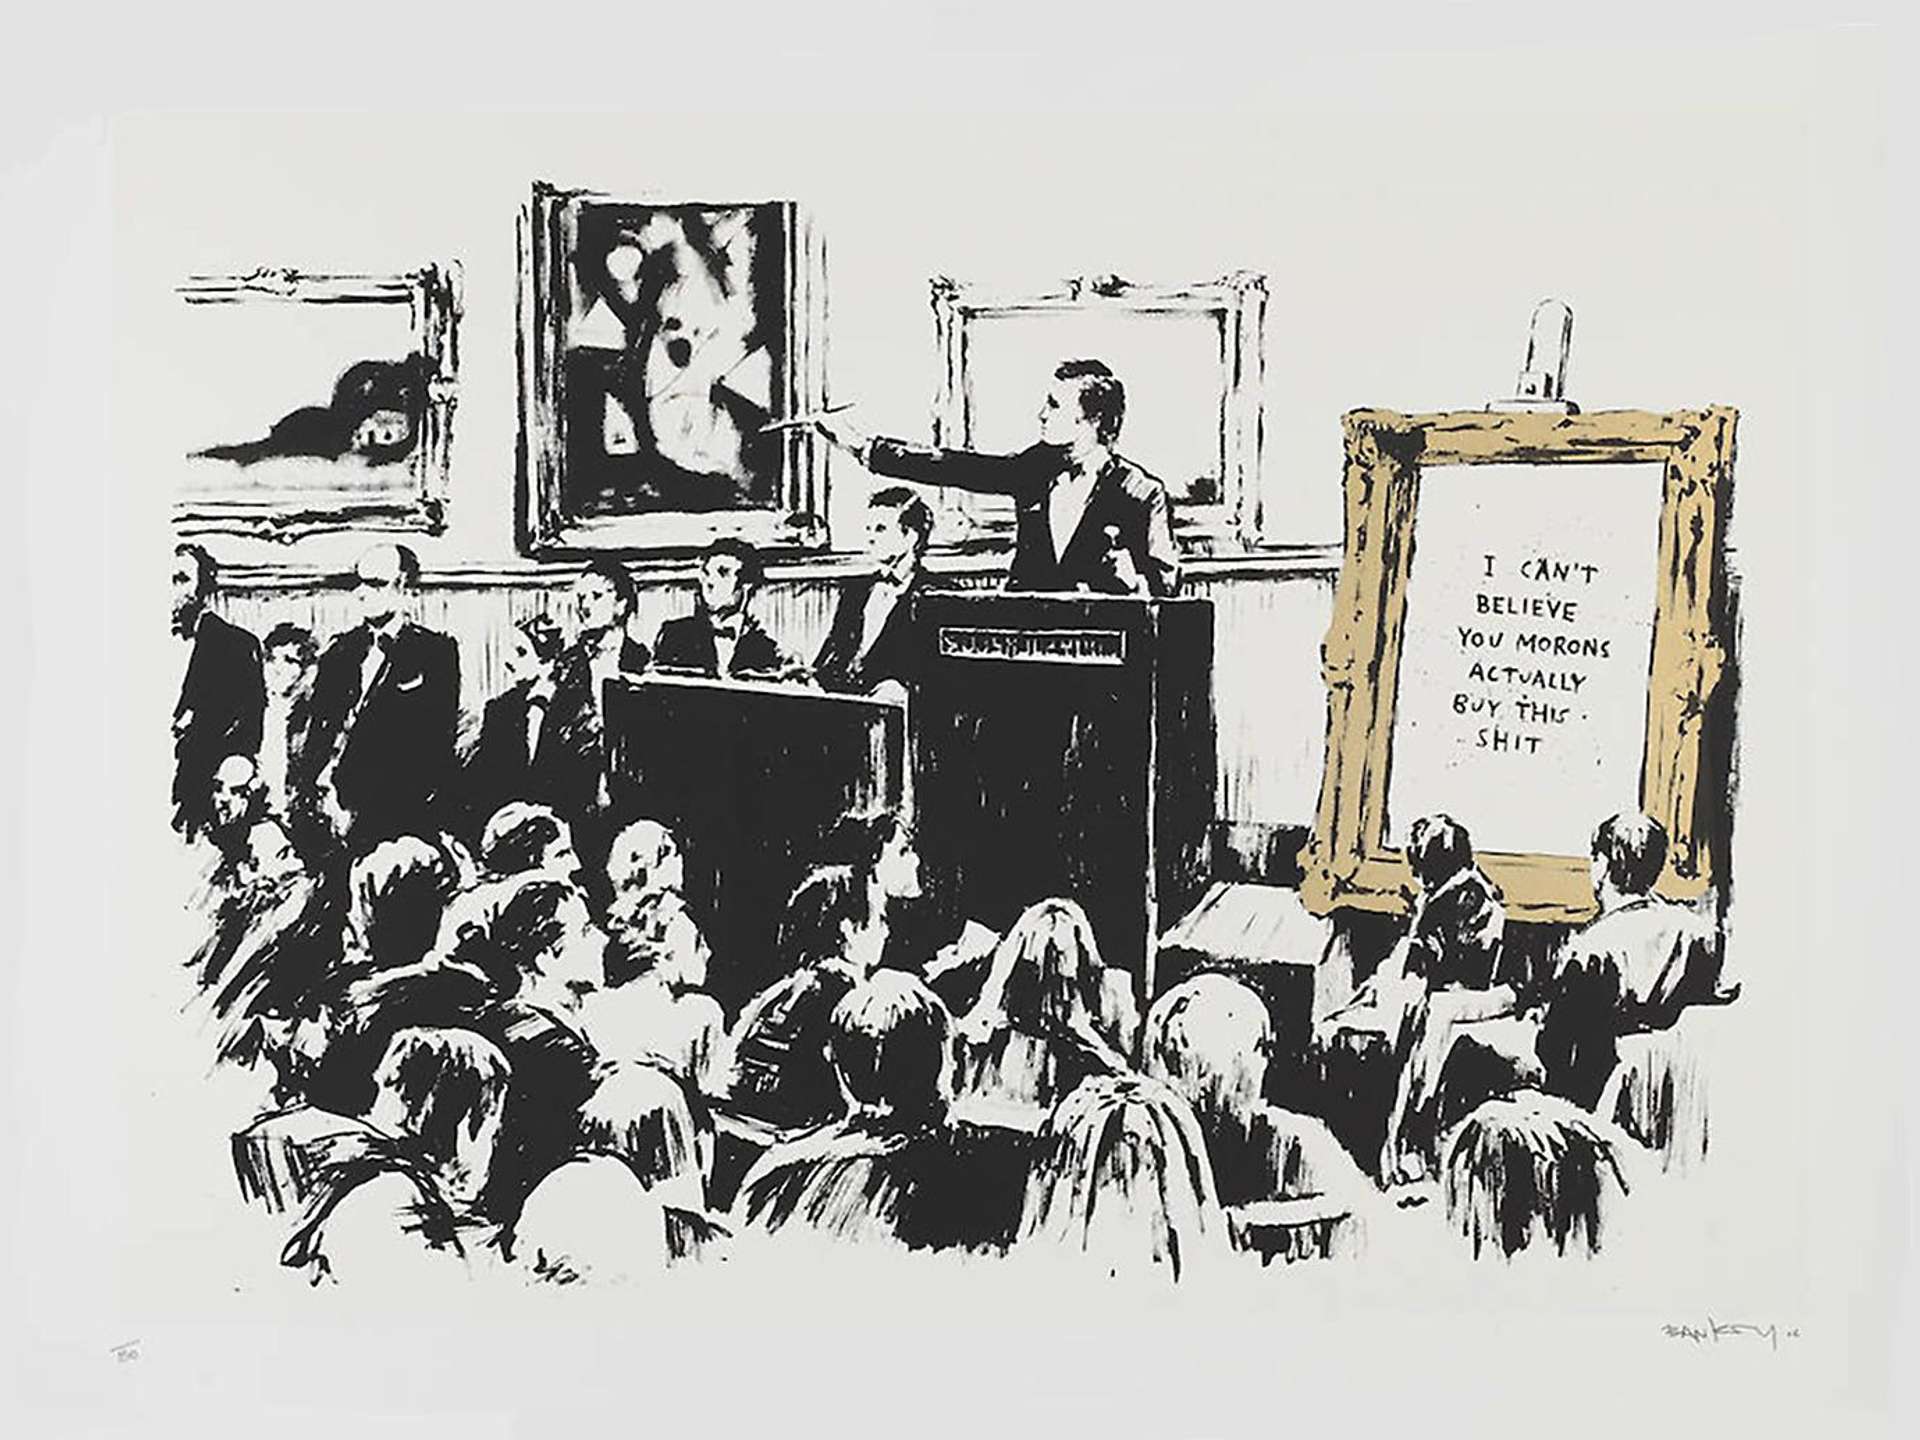 A screenprint by Banksy depicting Christie's auction house at the moment Van Gogh's Sunflowers sold, with the Sunflowers replaced with the words: "I CAN'T BELIEVE YOU MORONS ACTUALLY BUY THIS SHIT."